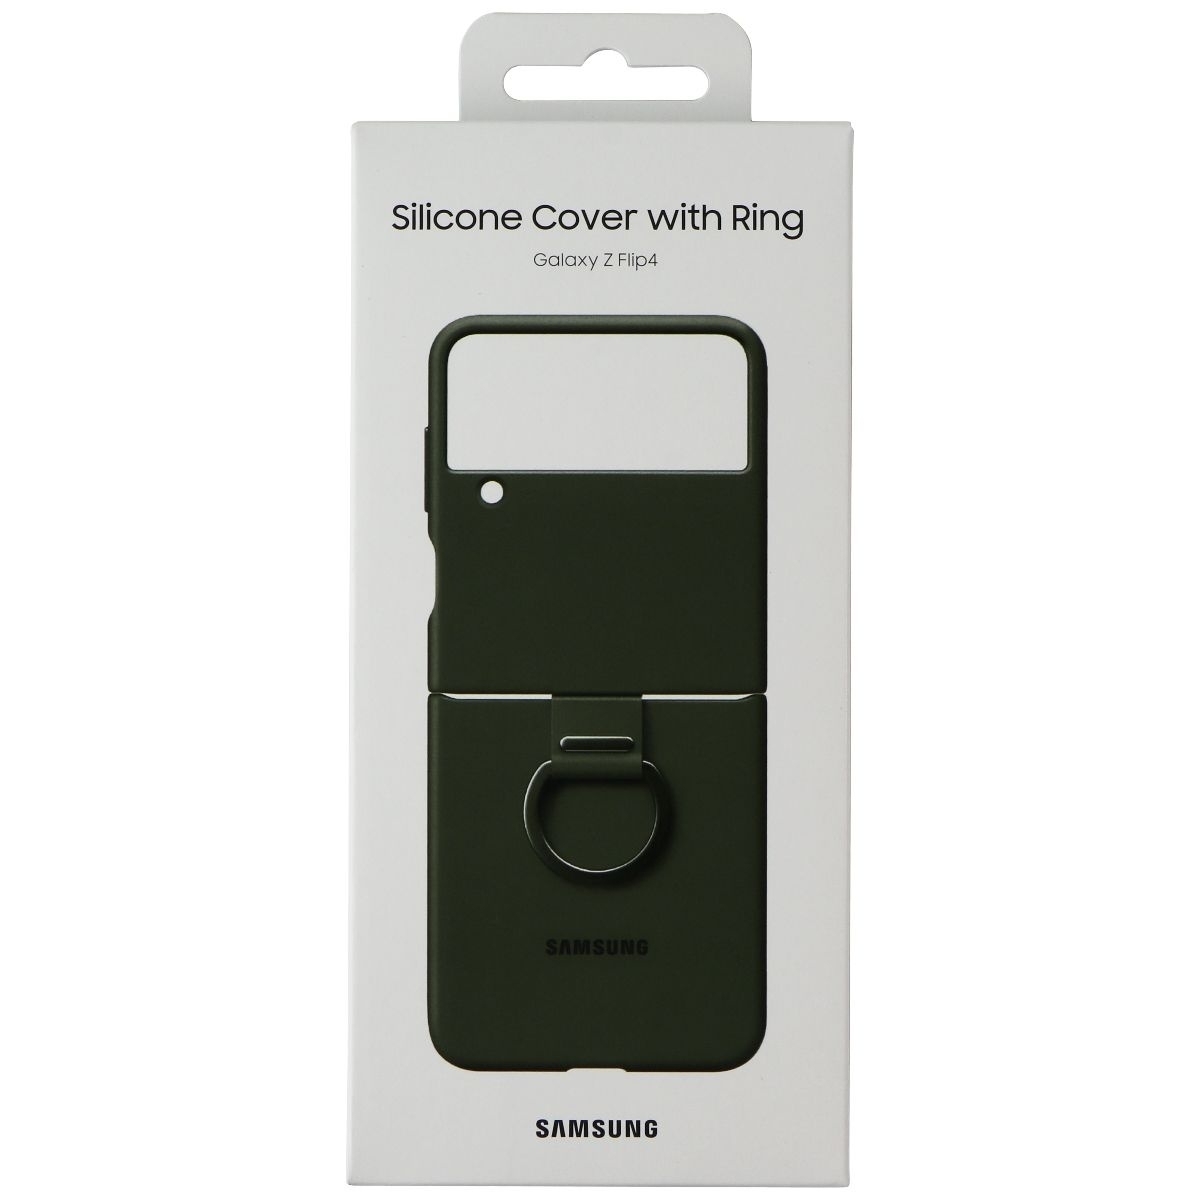 SAMSUNG Official Silicone Cover Case With Ring For Galaxy Z Flip 4 - Green